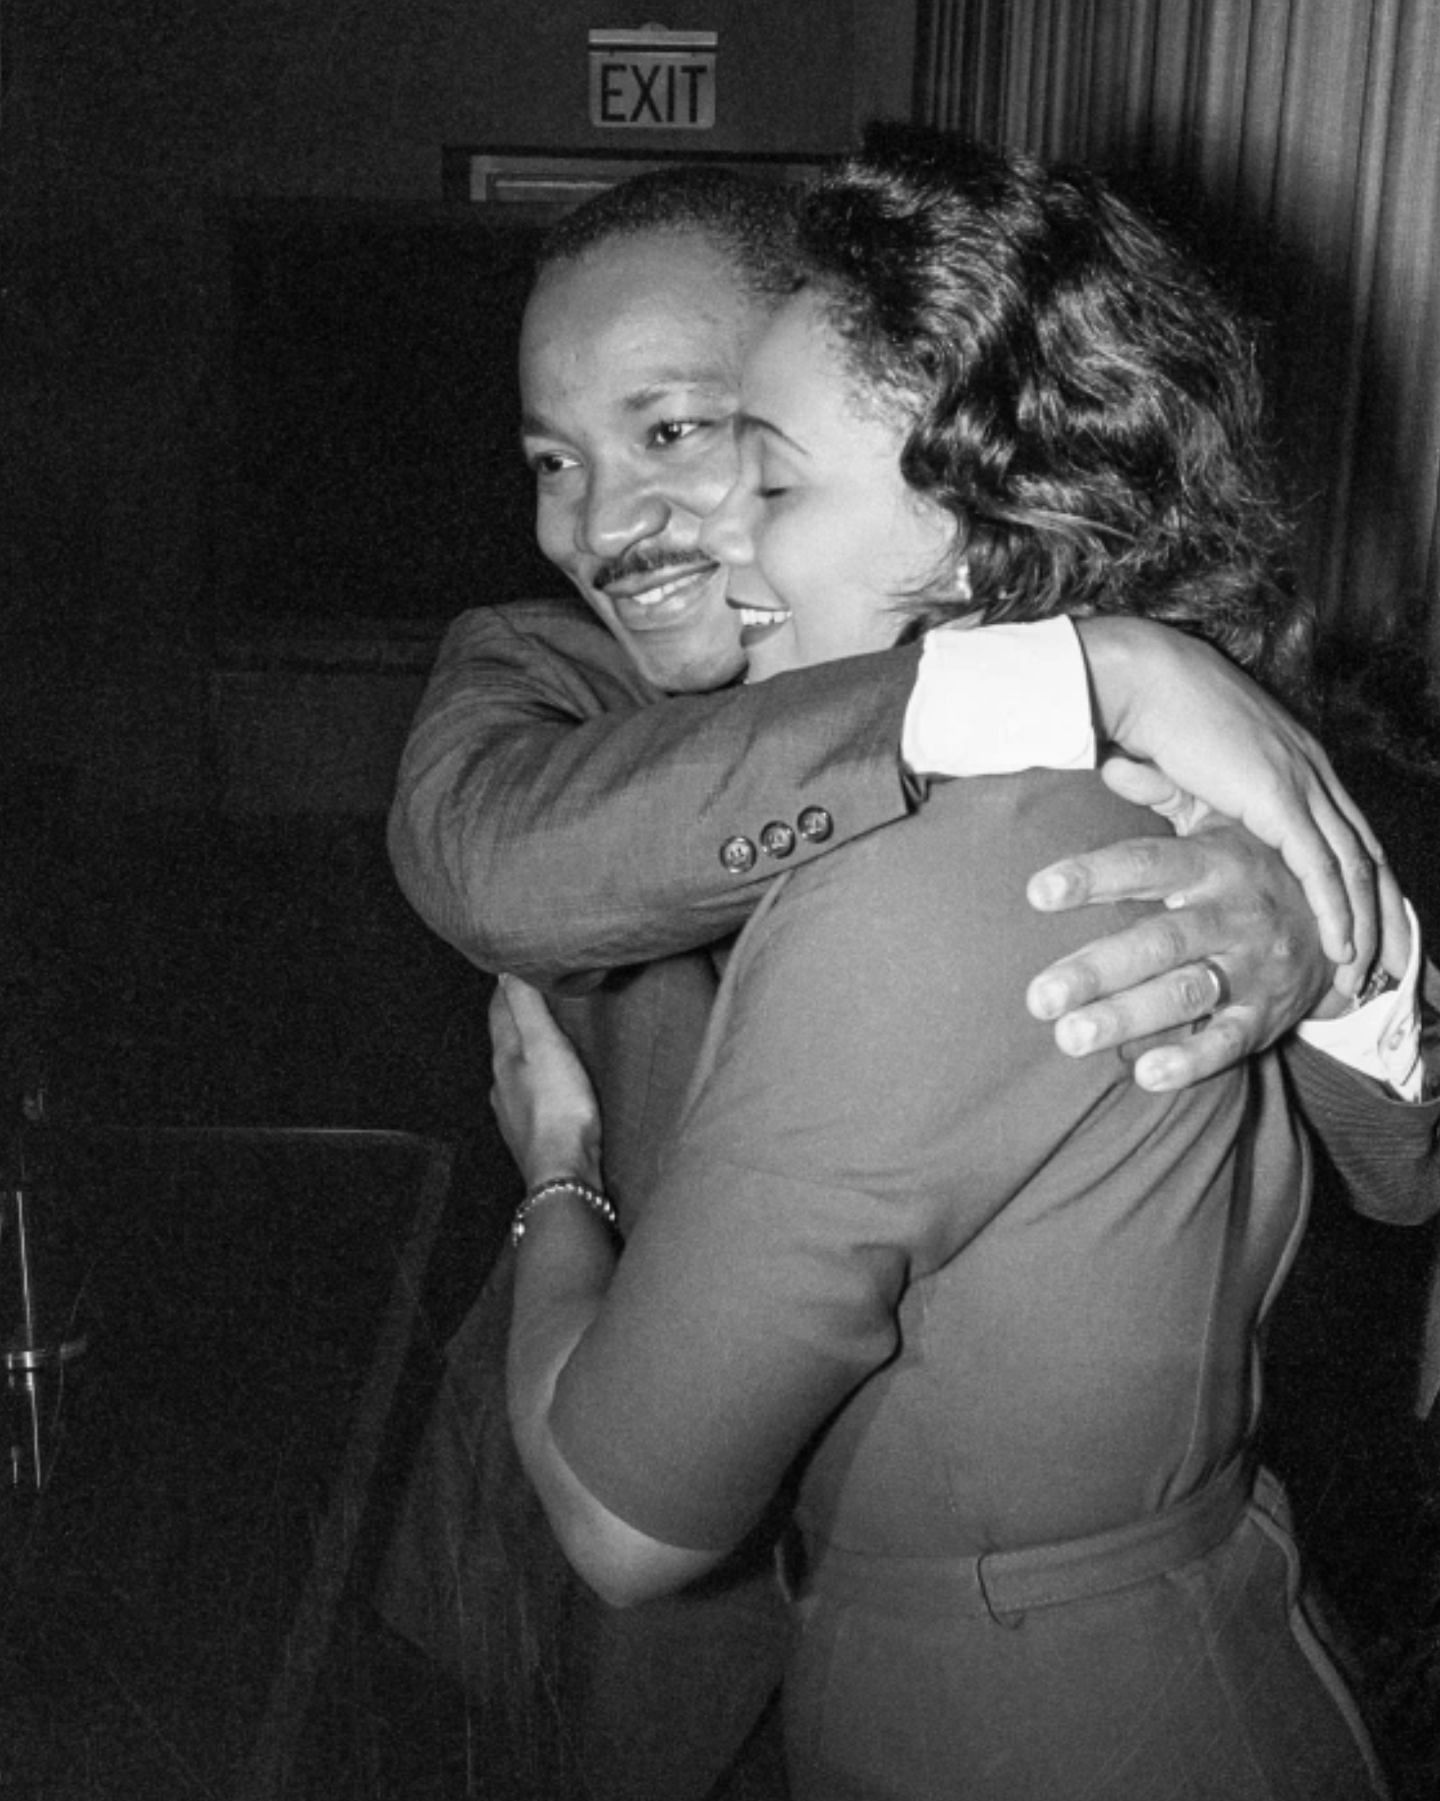 Martin Luther King Jr. hugs his wife Coretta Scott King after the announcement of him being awarded the Nobel Peace Prize on October 14, 1964. (Image via Bettmann Archive)